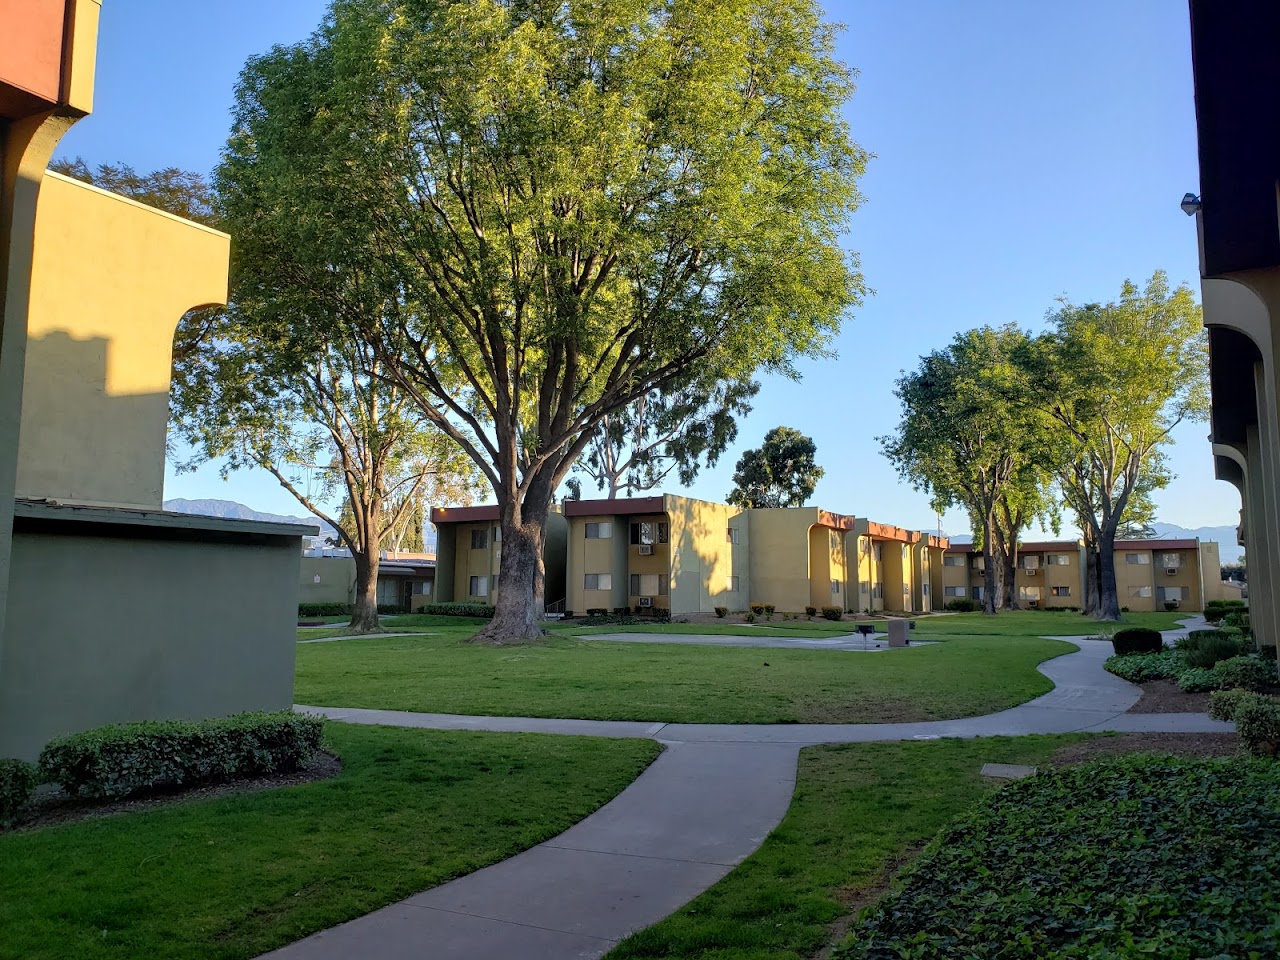 Photo of CAMERON PARK APTS. Affordable housing located at 929 W CAMERON AVE WEST COVINA, CA 91790